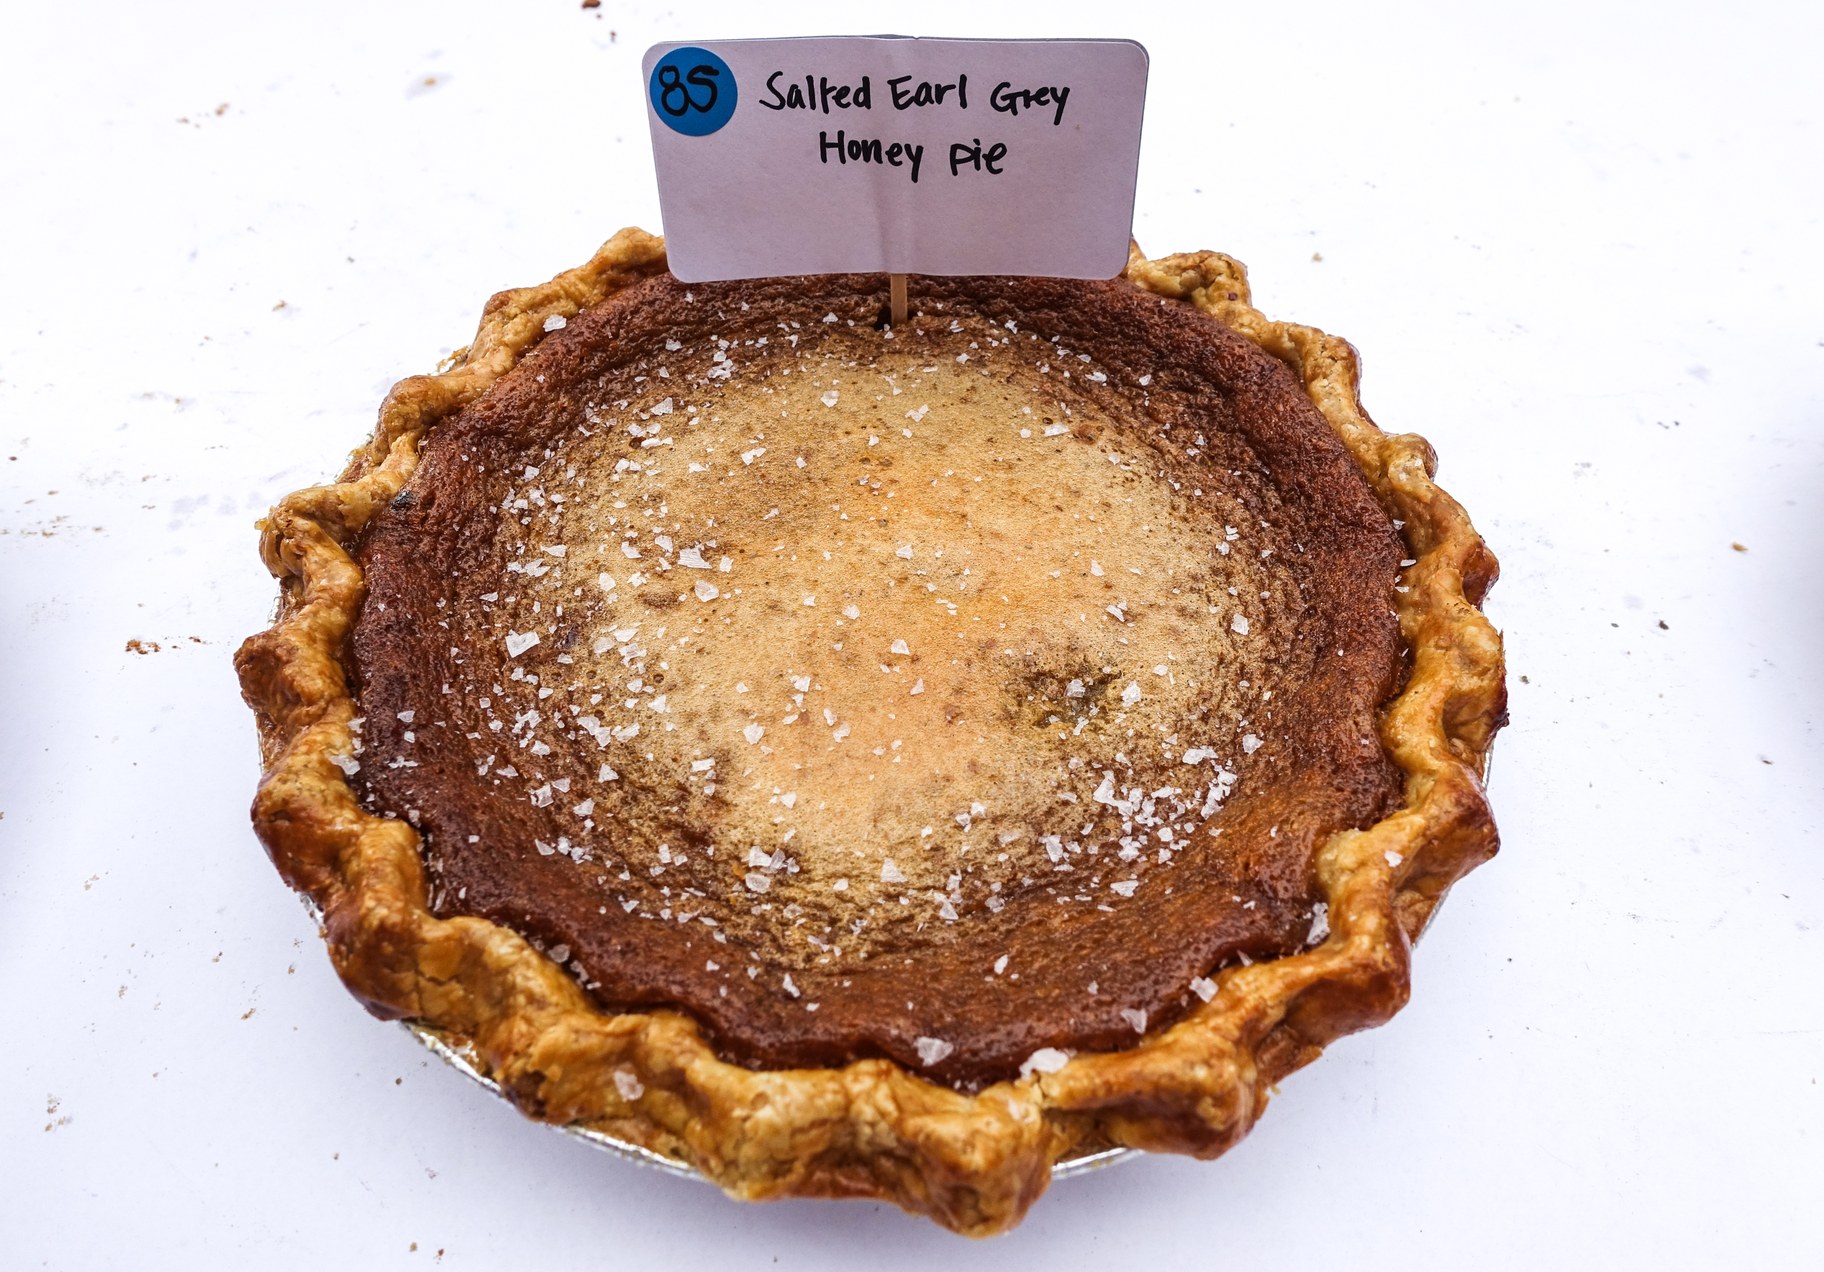 Congratulations to the 2019 Good Food Pie Contest winners! KCRW